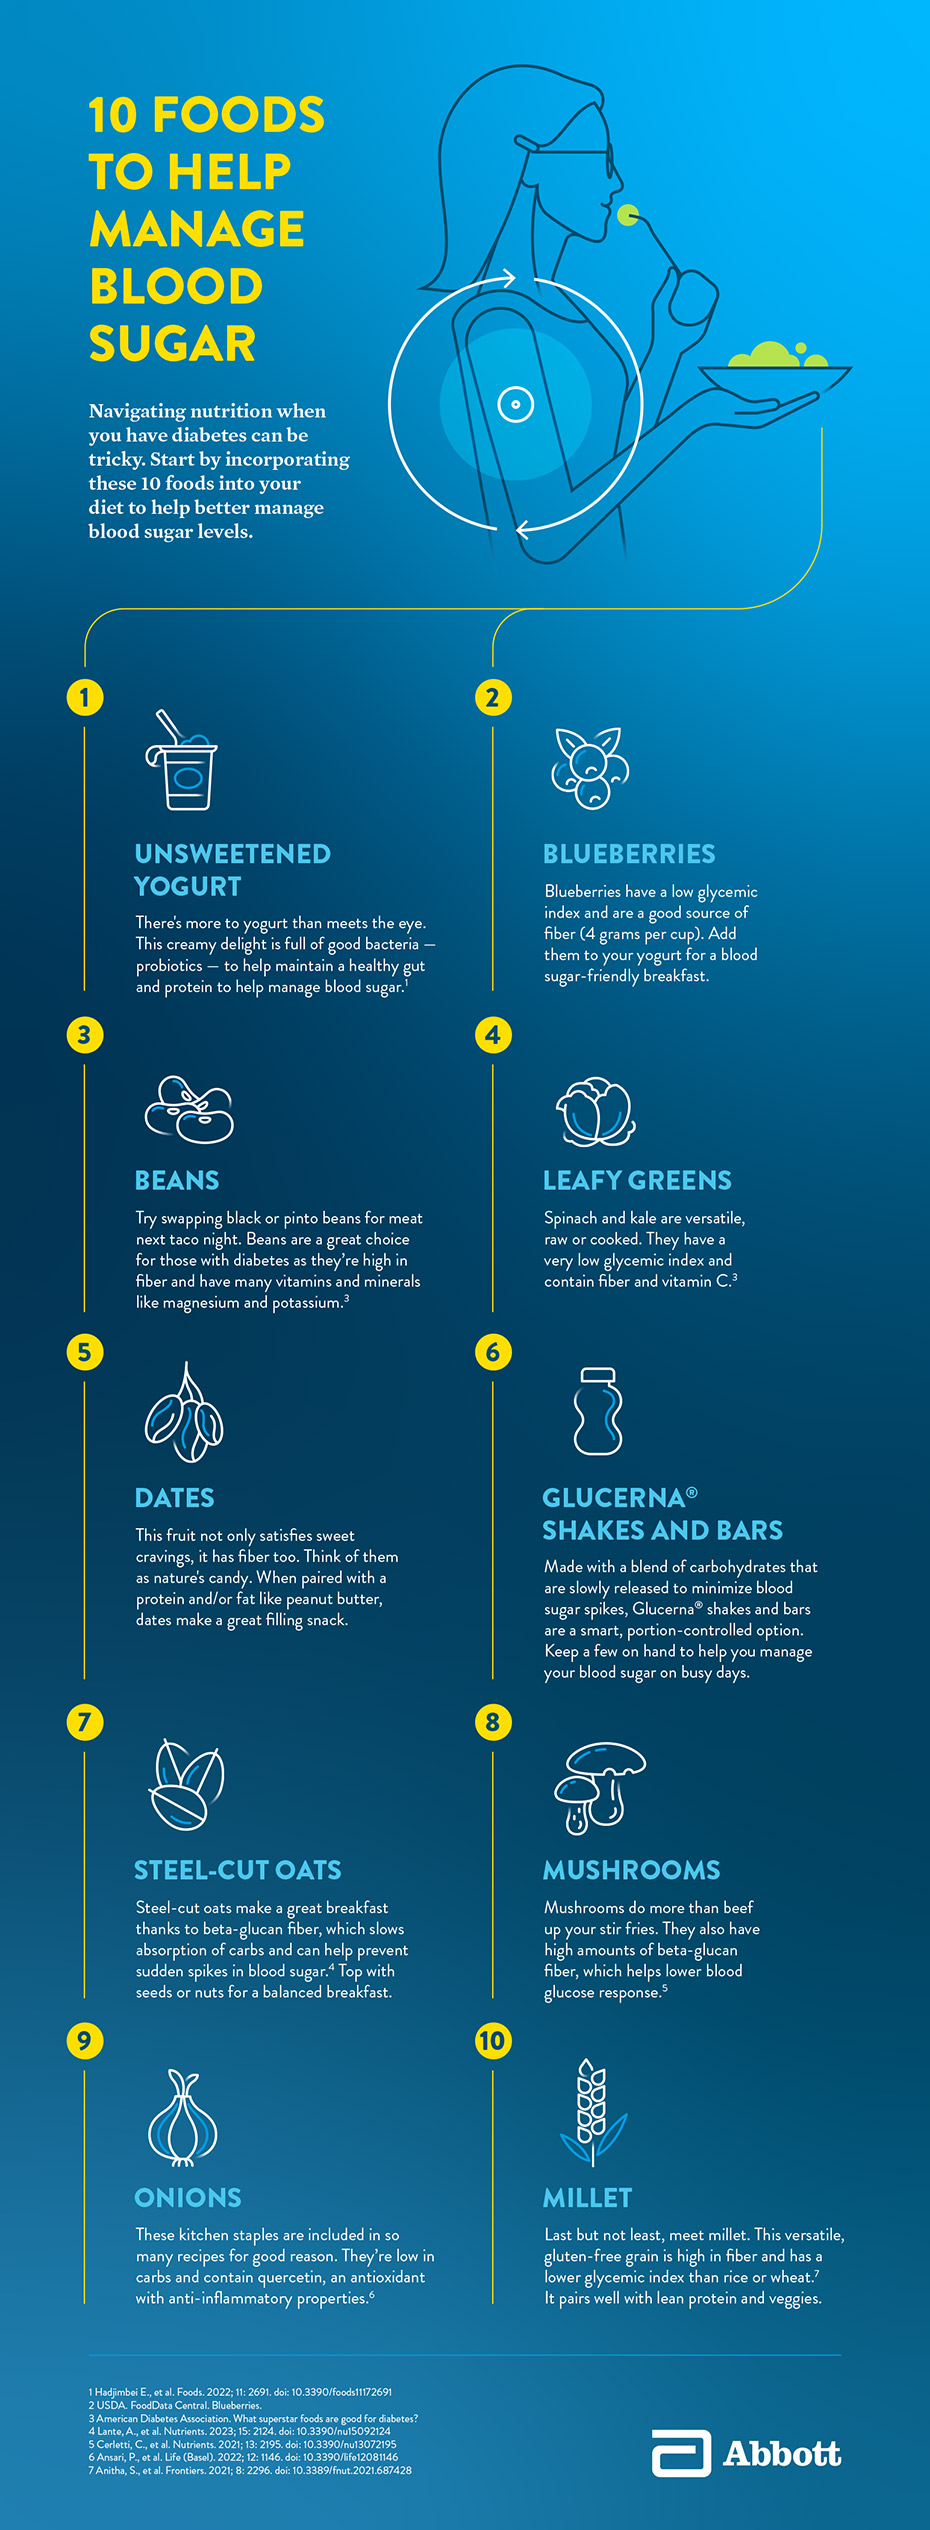 An infographic titled 10 Foods to Help Manage Blood Sugar shows an image of a person smiling while eating a salad, with information about how foods such as unsweetened yogurt, blueberries, beans, leafy greens, dates, Glucerna shakes and bars, steel-cut oats, mushrooms, onions and millet can help with blood sugar management.